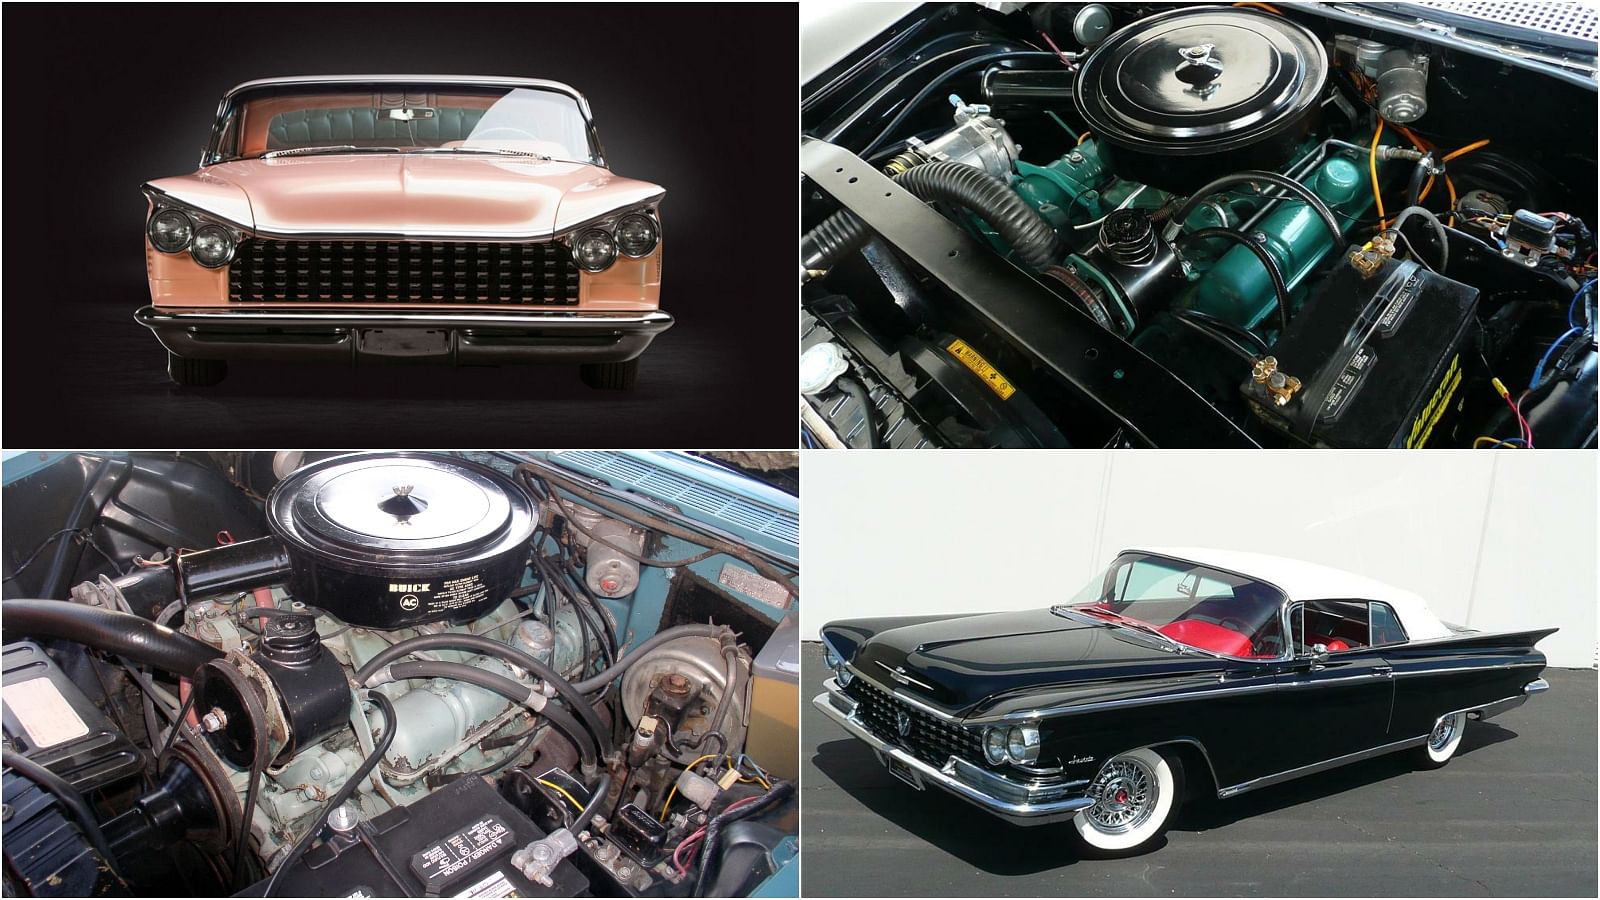 1959 Buick Invicta front view and Engine